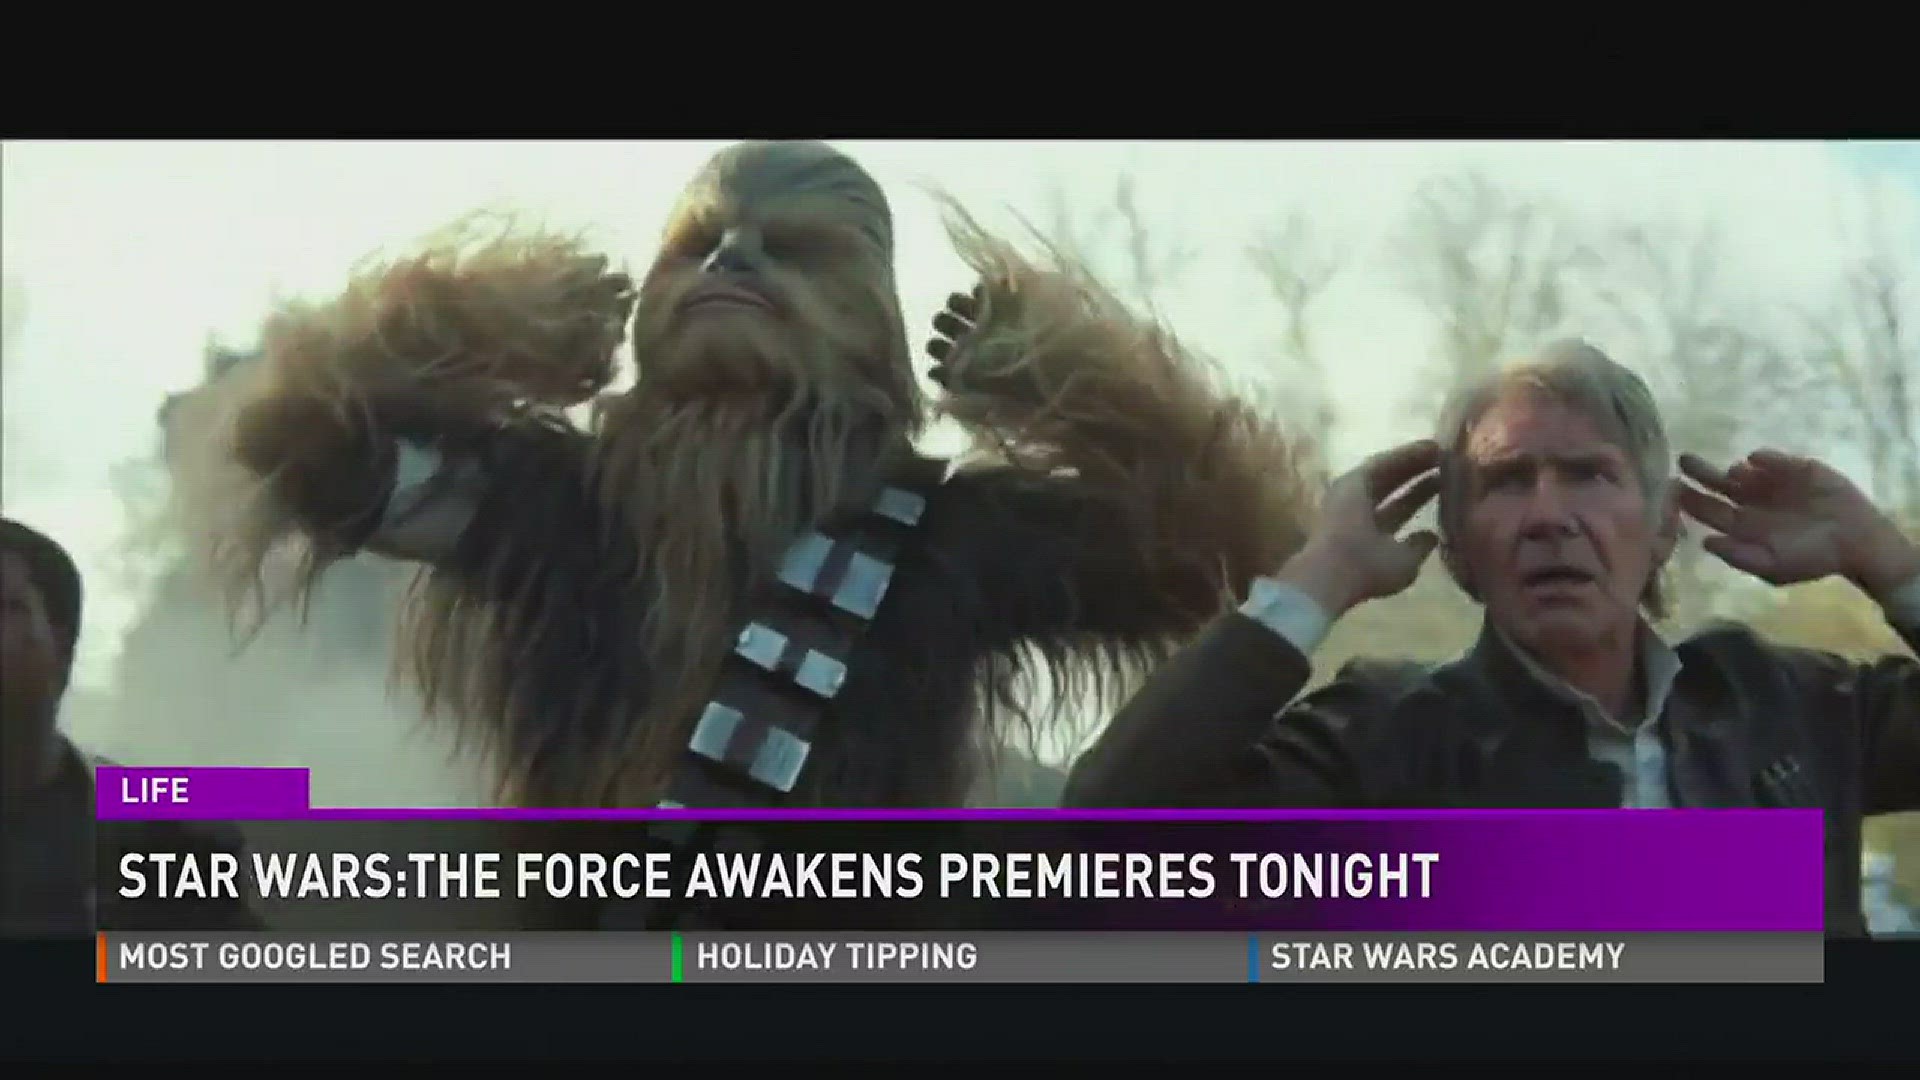 "Star Wars: The Force Awakens" premieres Thursday night across the U.S.